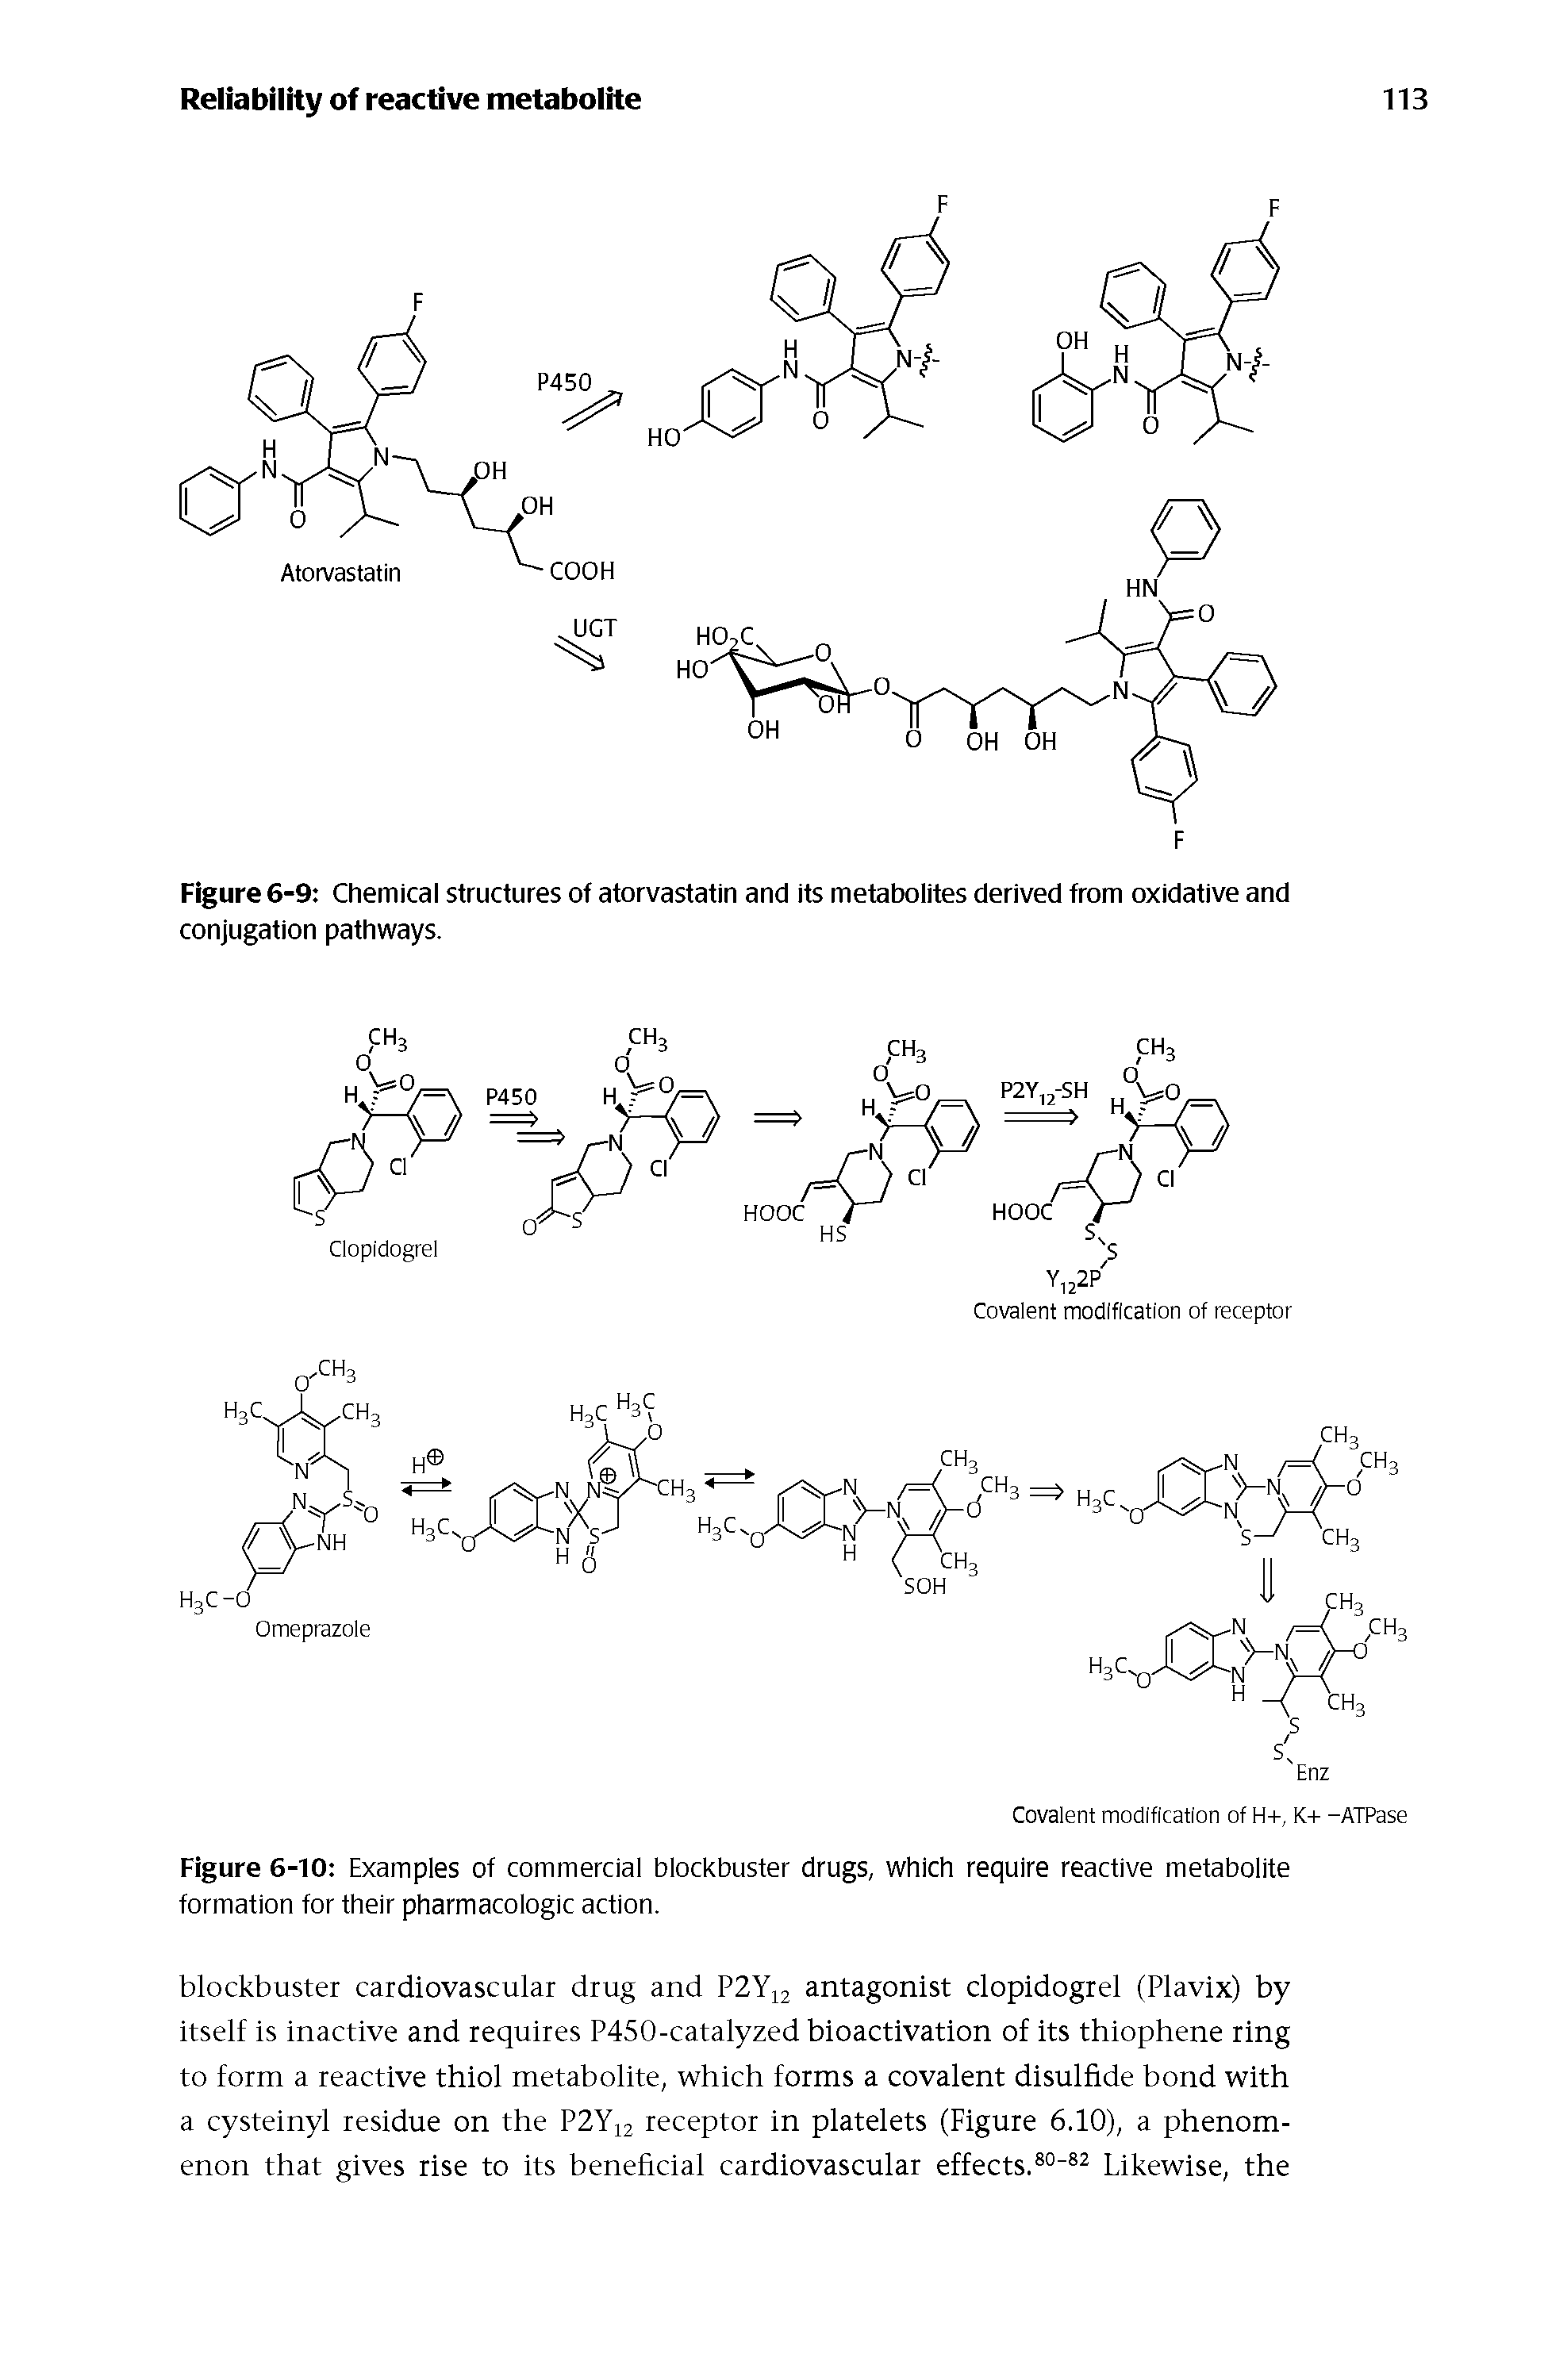 Figure 6-10 Examples of commercial blockbuster drugs, which require reactive metabolite formation for their pharmacologic action.